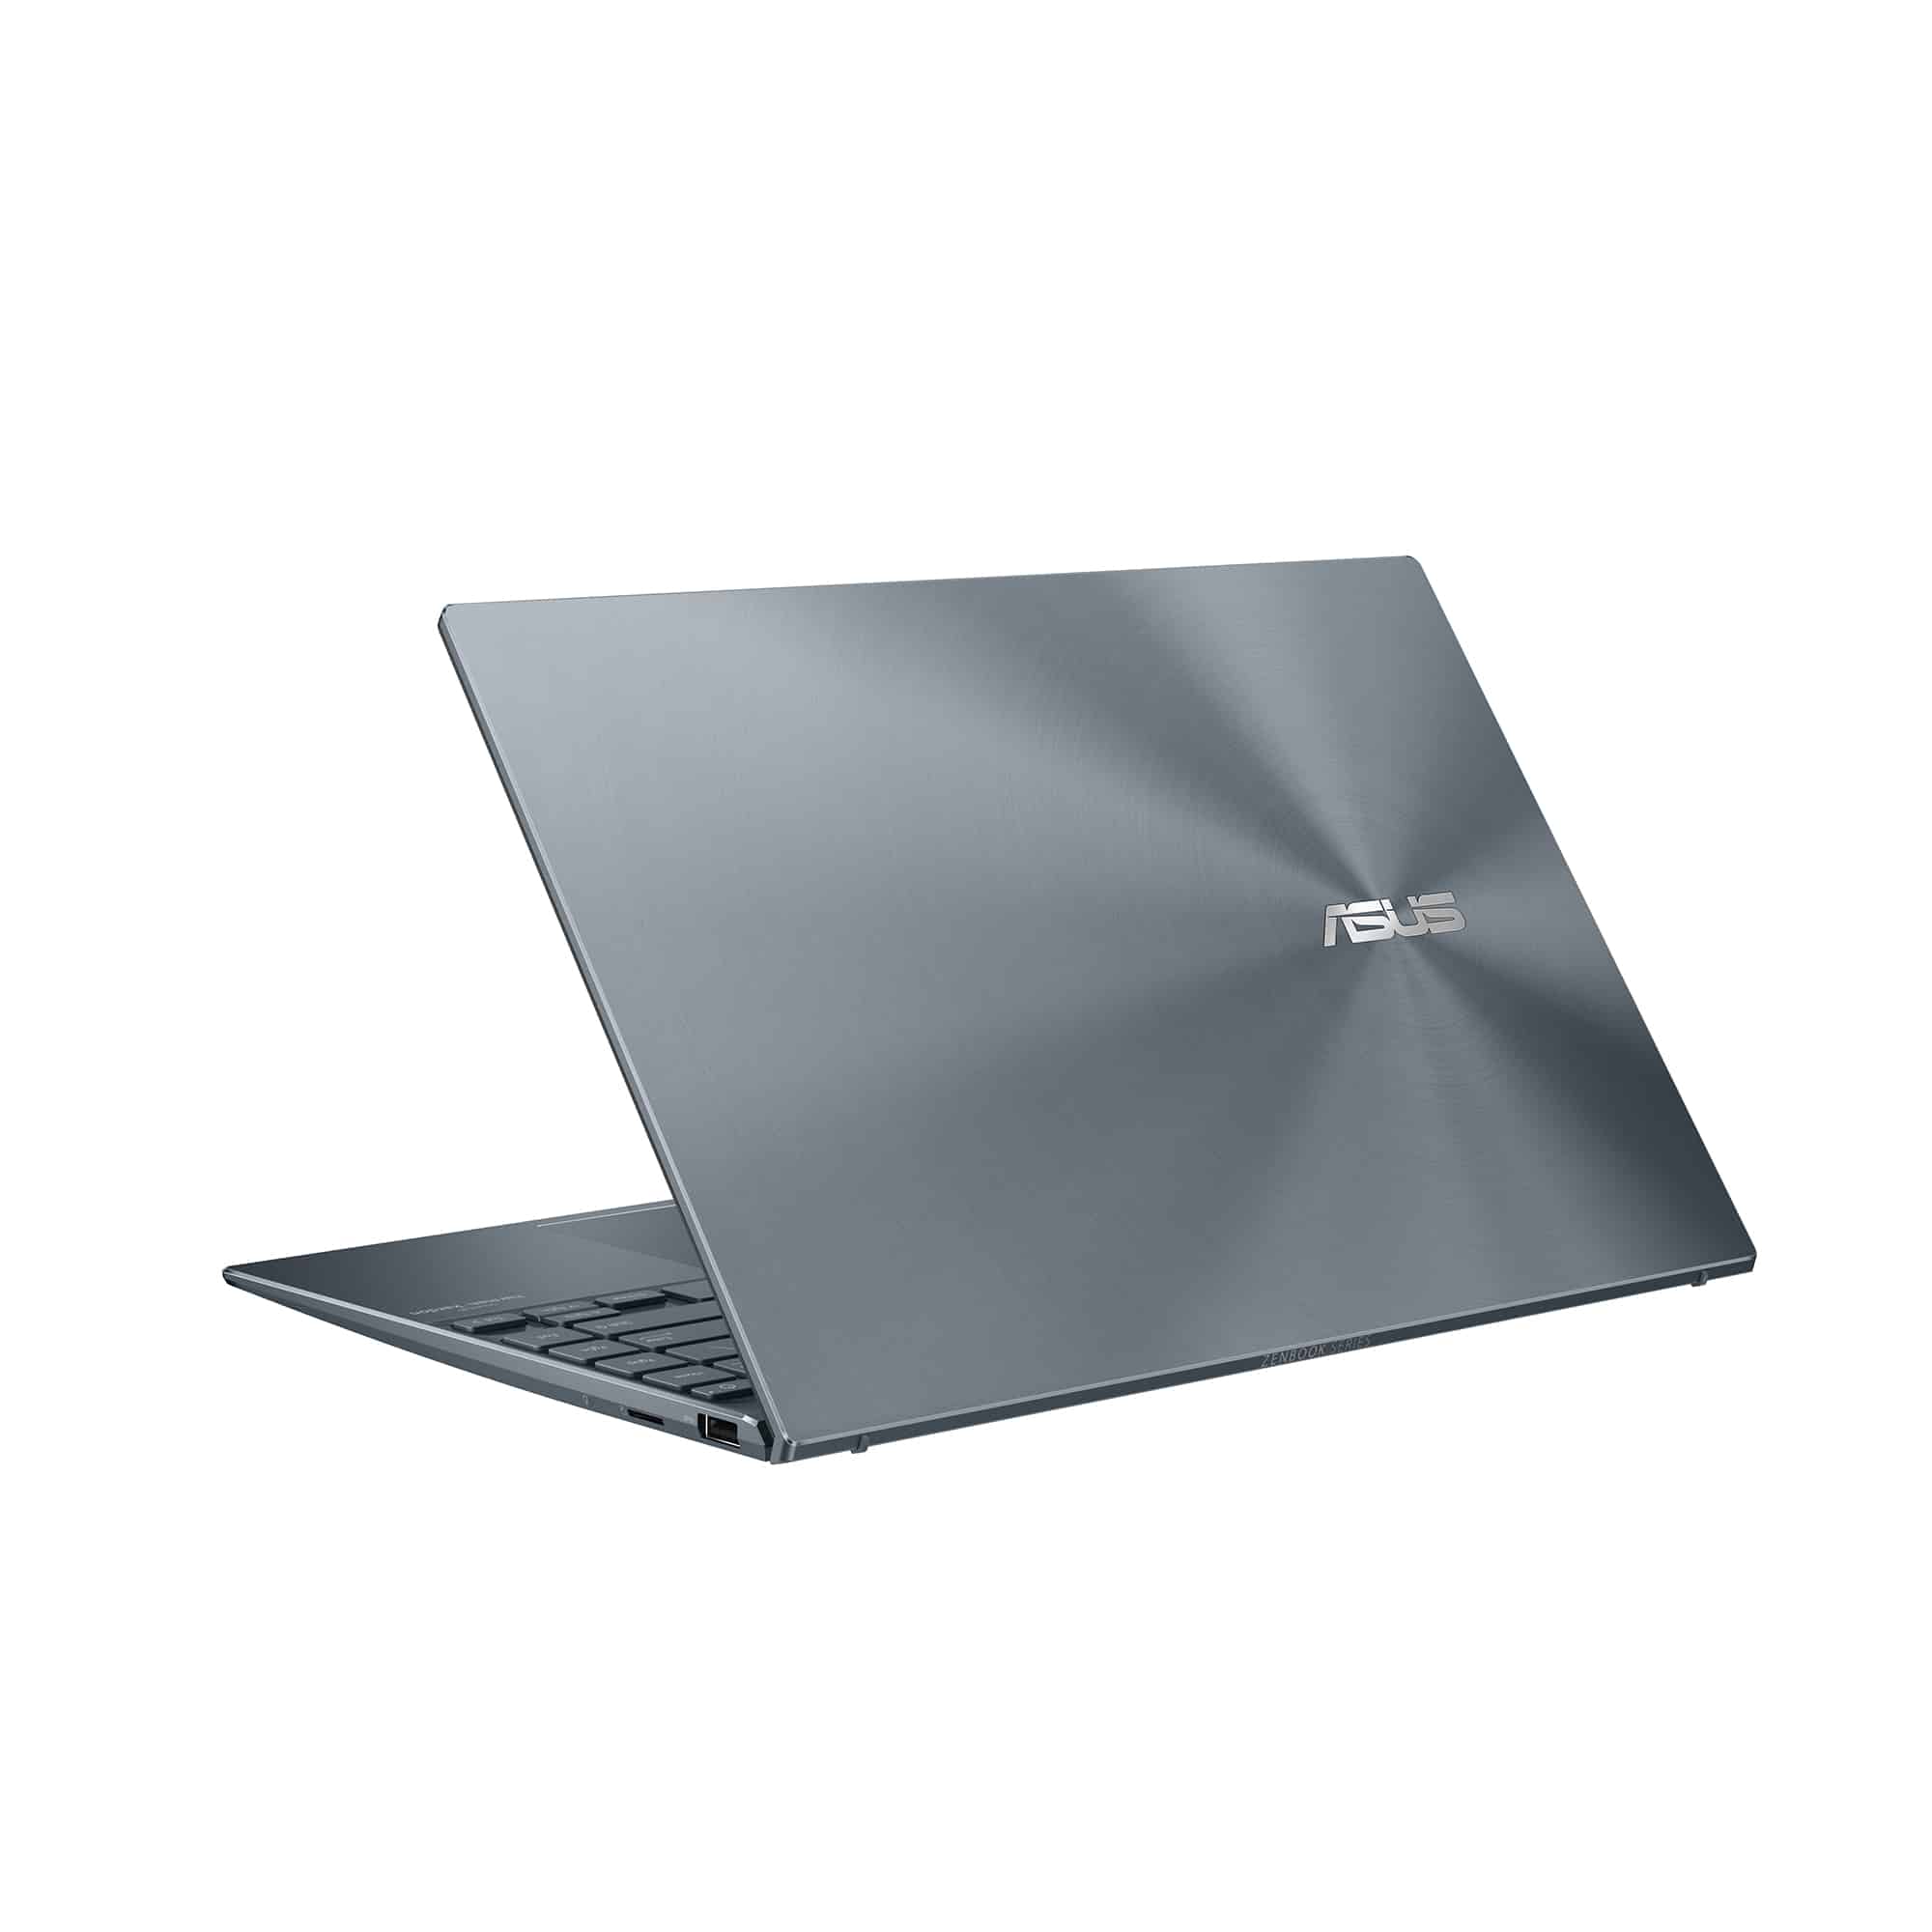 ASUS Announces All-New ZenBook 13 OLED